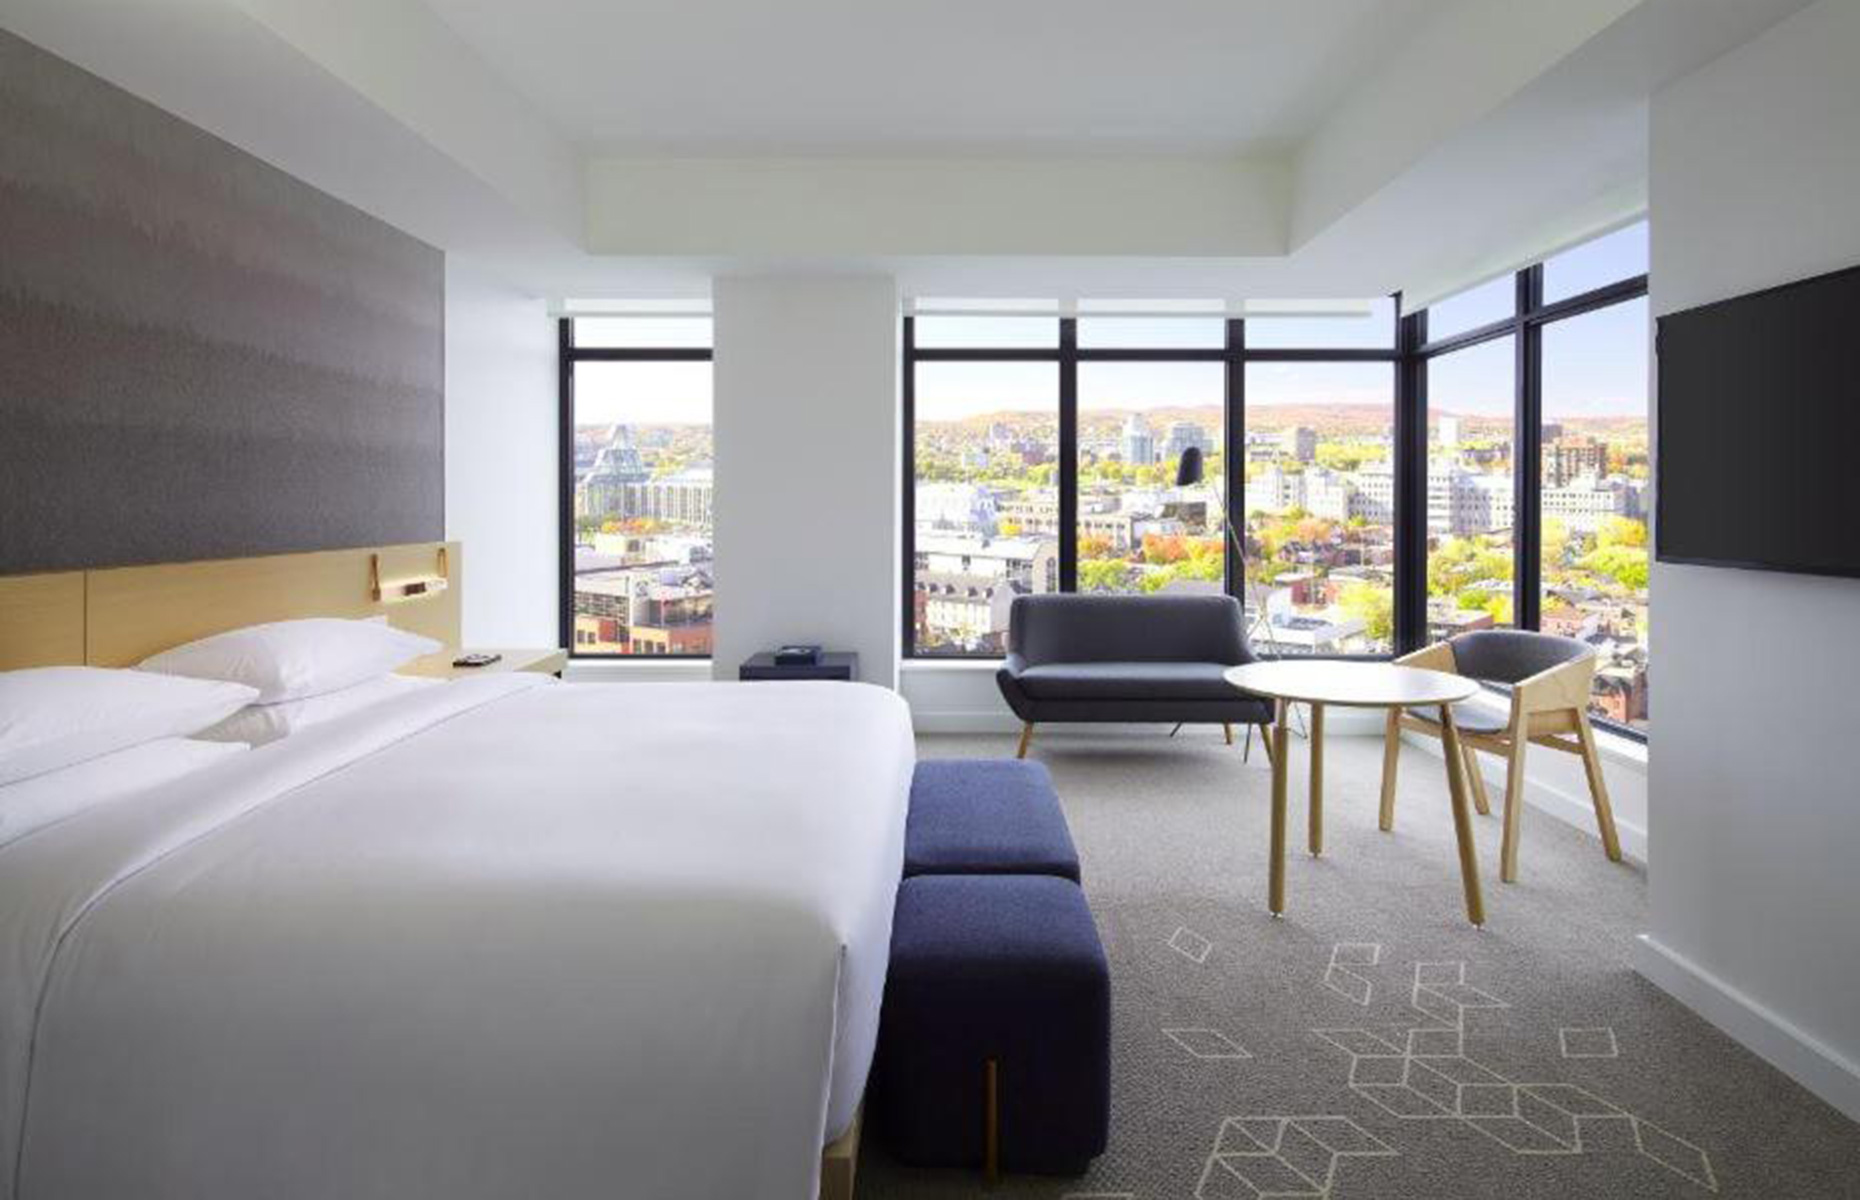 Andaz Ottawa Byward Market offers floor-to-ceiling windows(Image: Andaz Ottawa Byward Market/Booking.com)